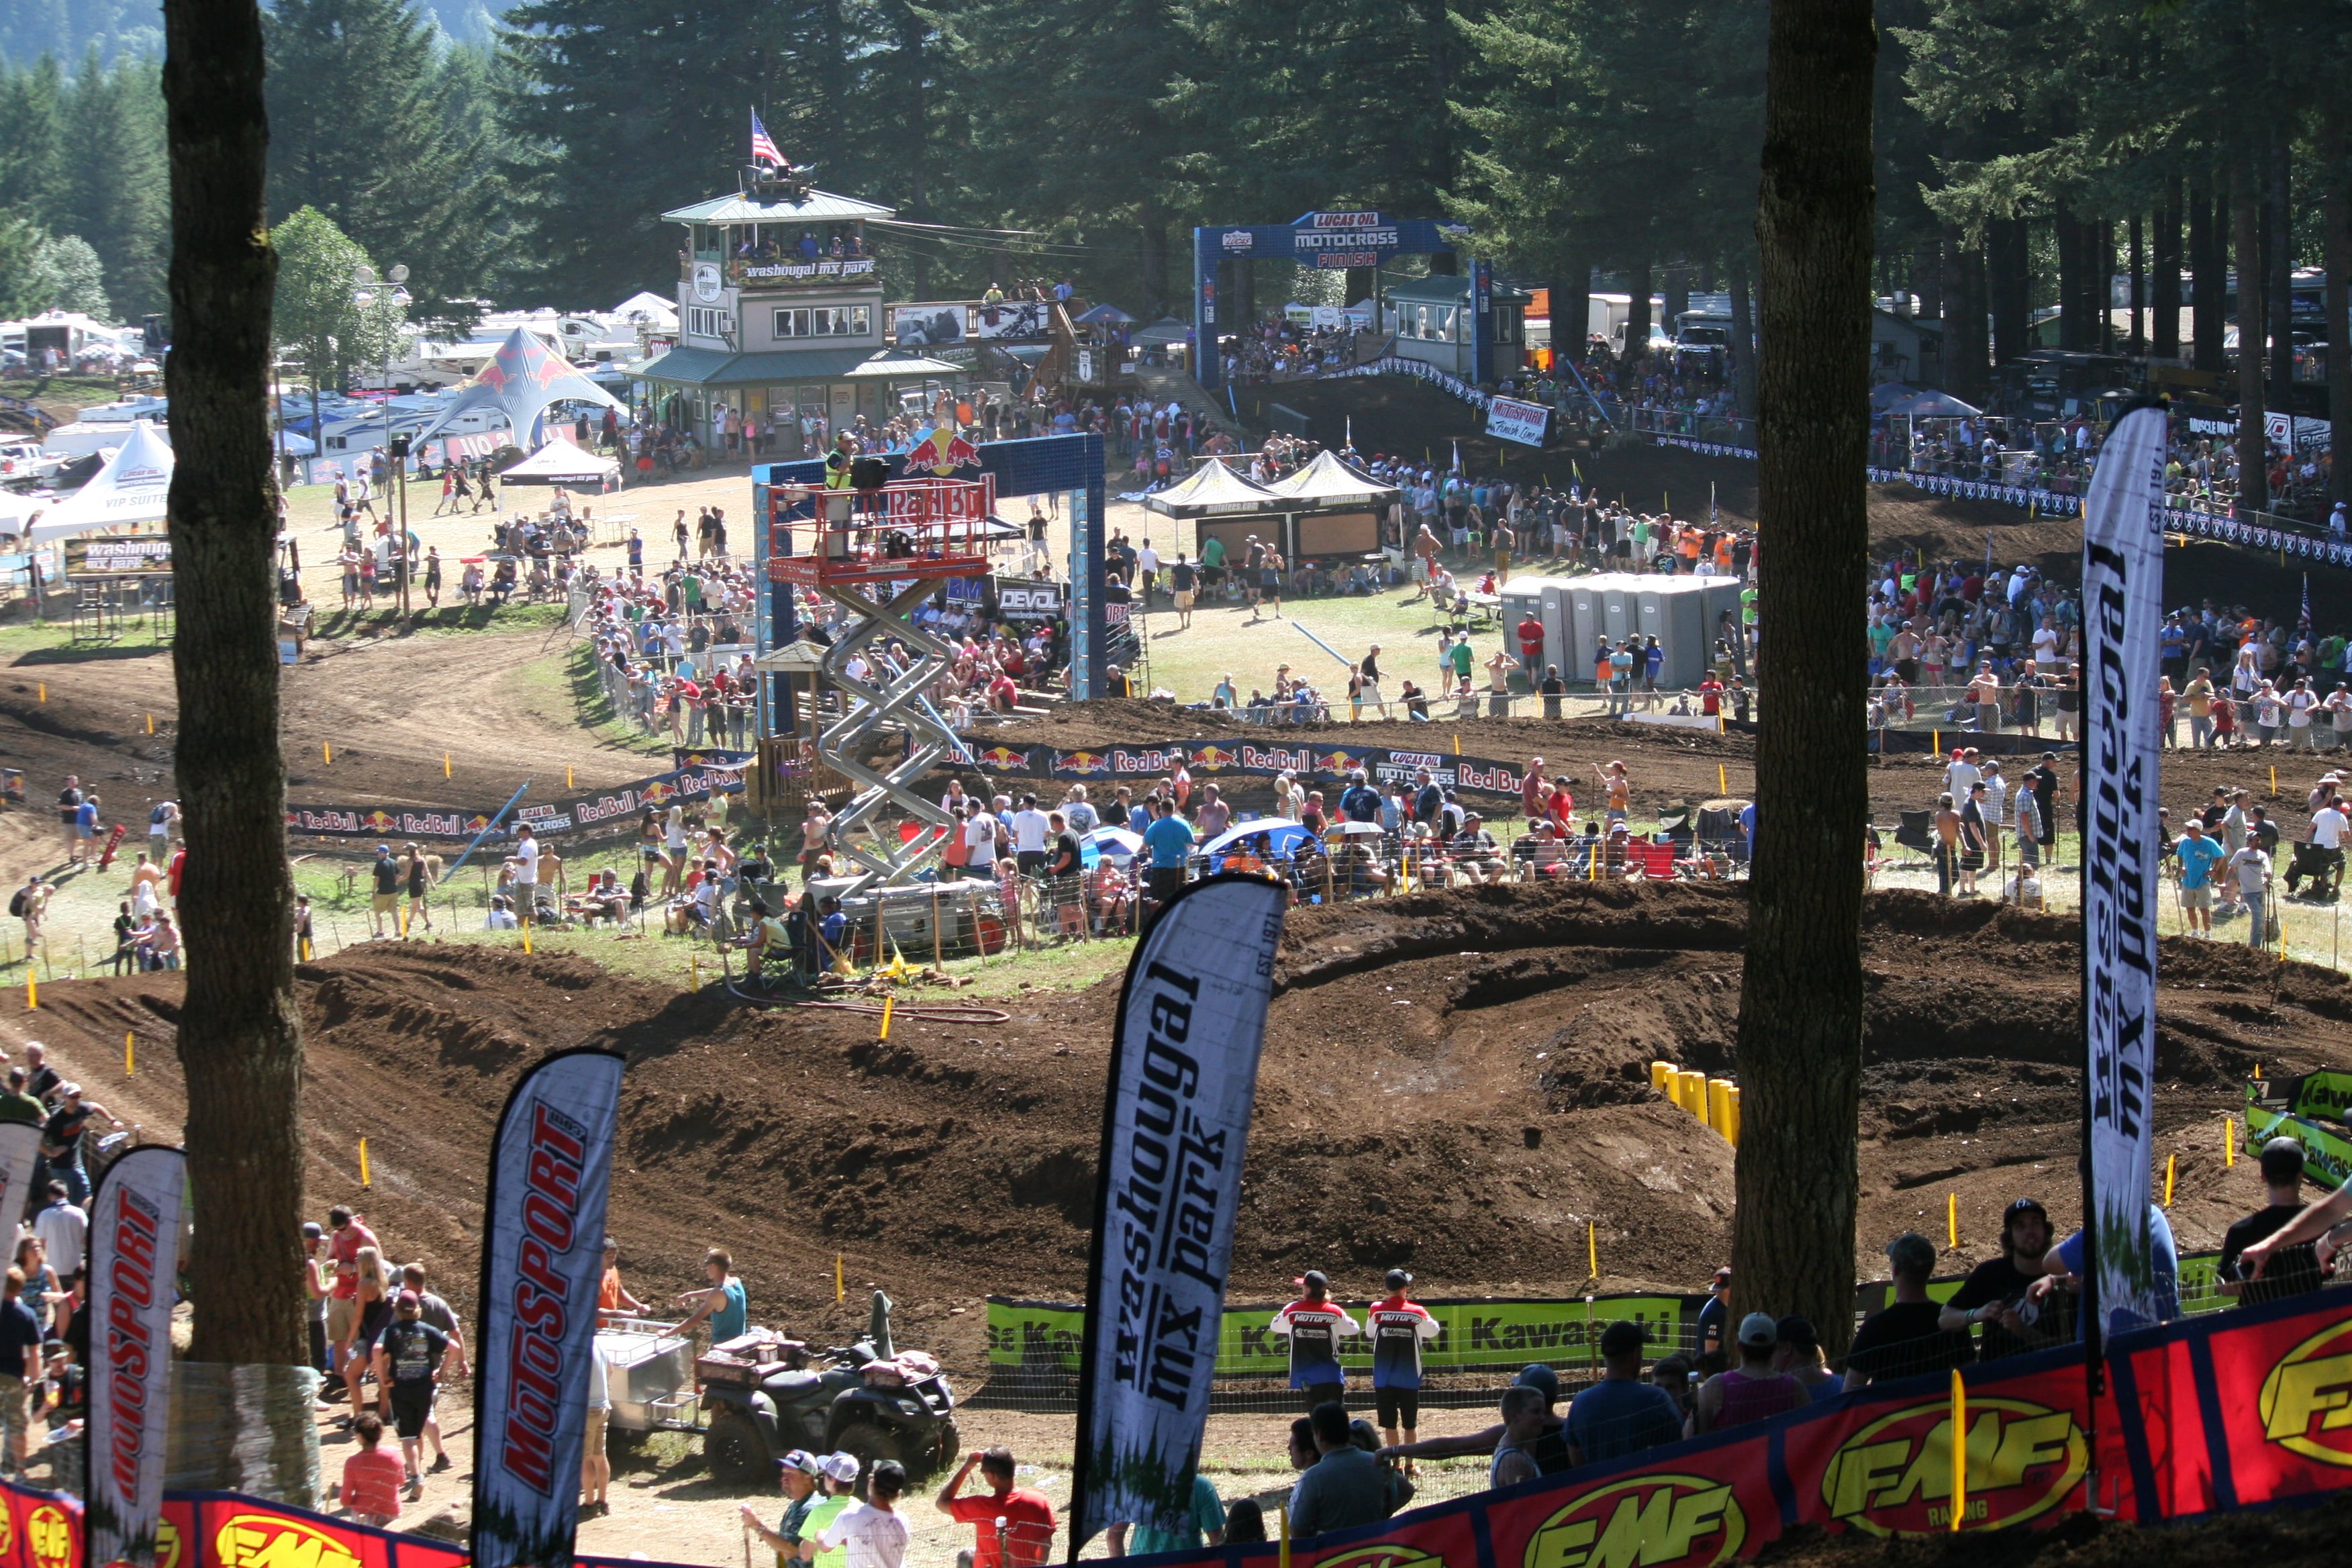 Gearing up for the last pro motocross race of the day at Washougal.